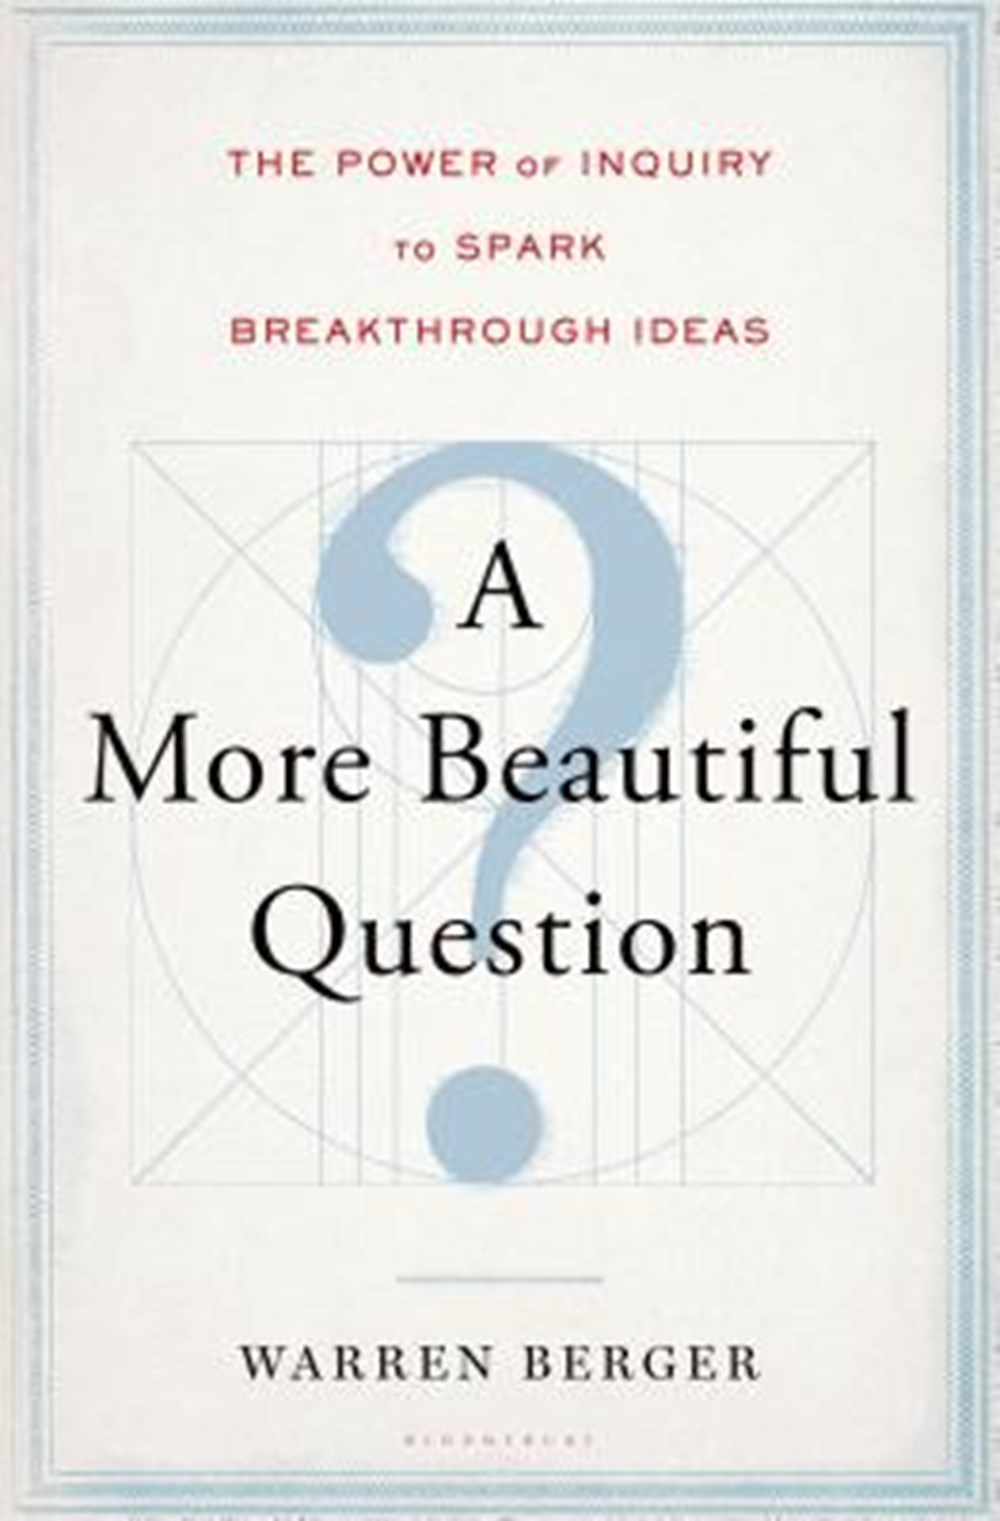 More Beautiful Question The Power of Inquiry to Spark Breakthrough Ideas